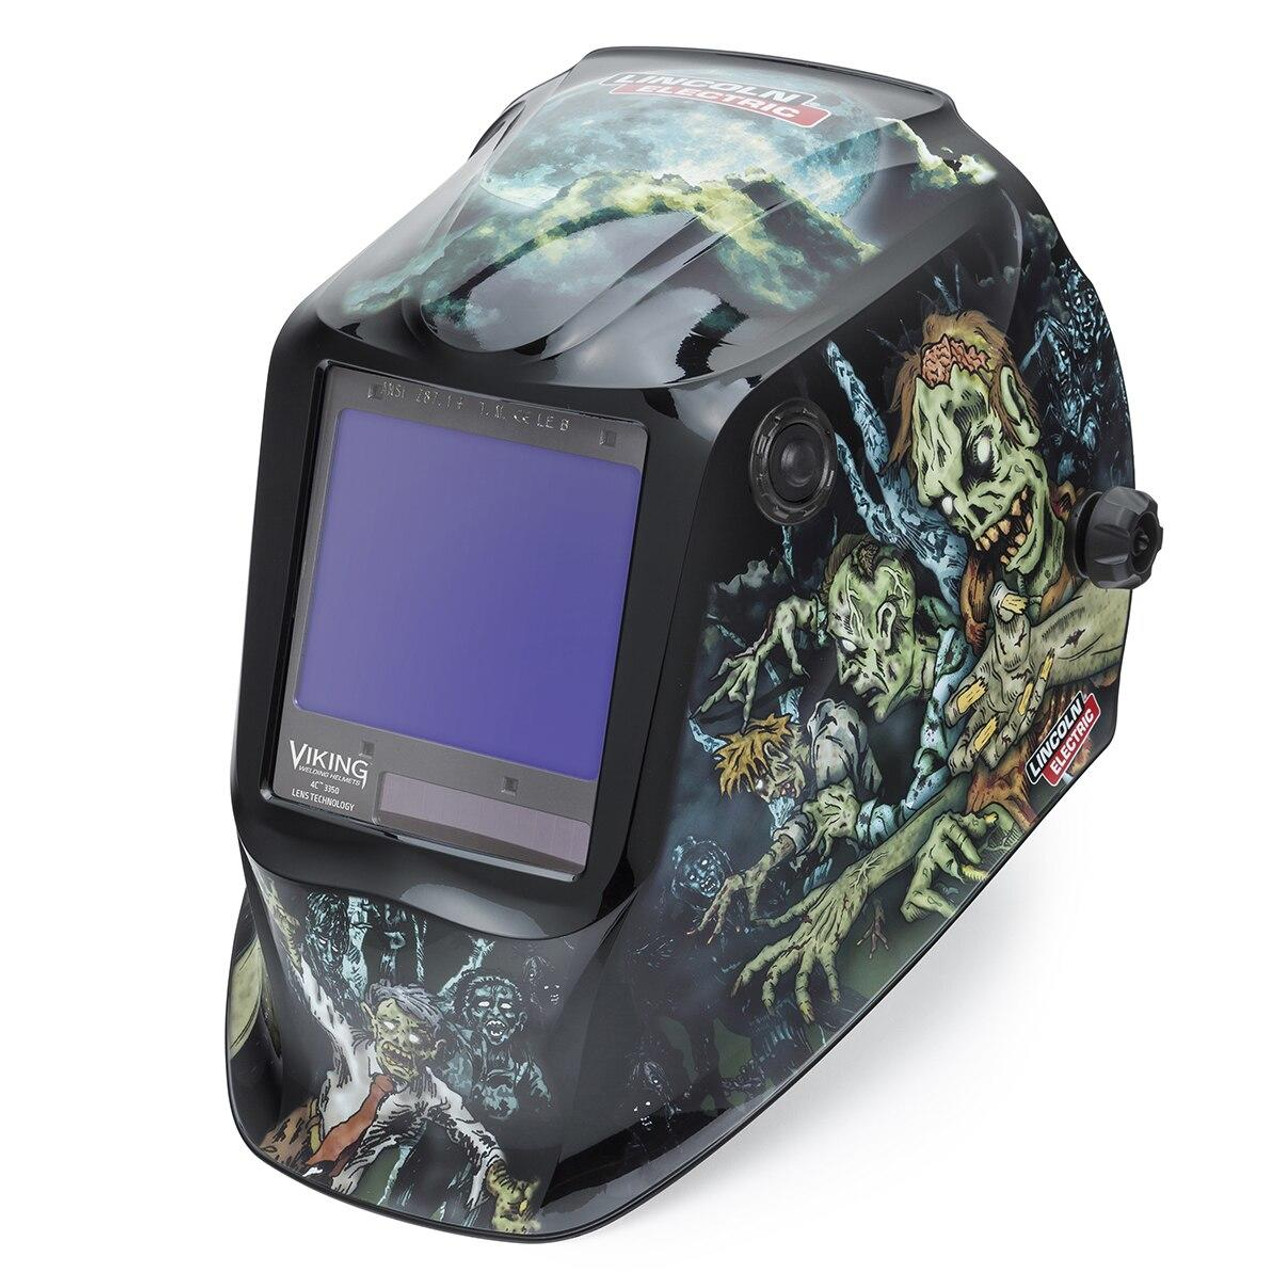 lincoln-electric-viking-3350-redblacktan-welding-helmet-with-variable